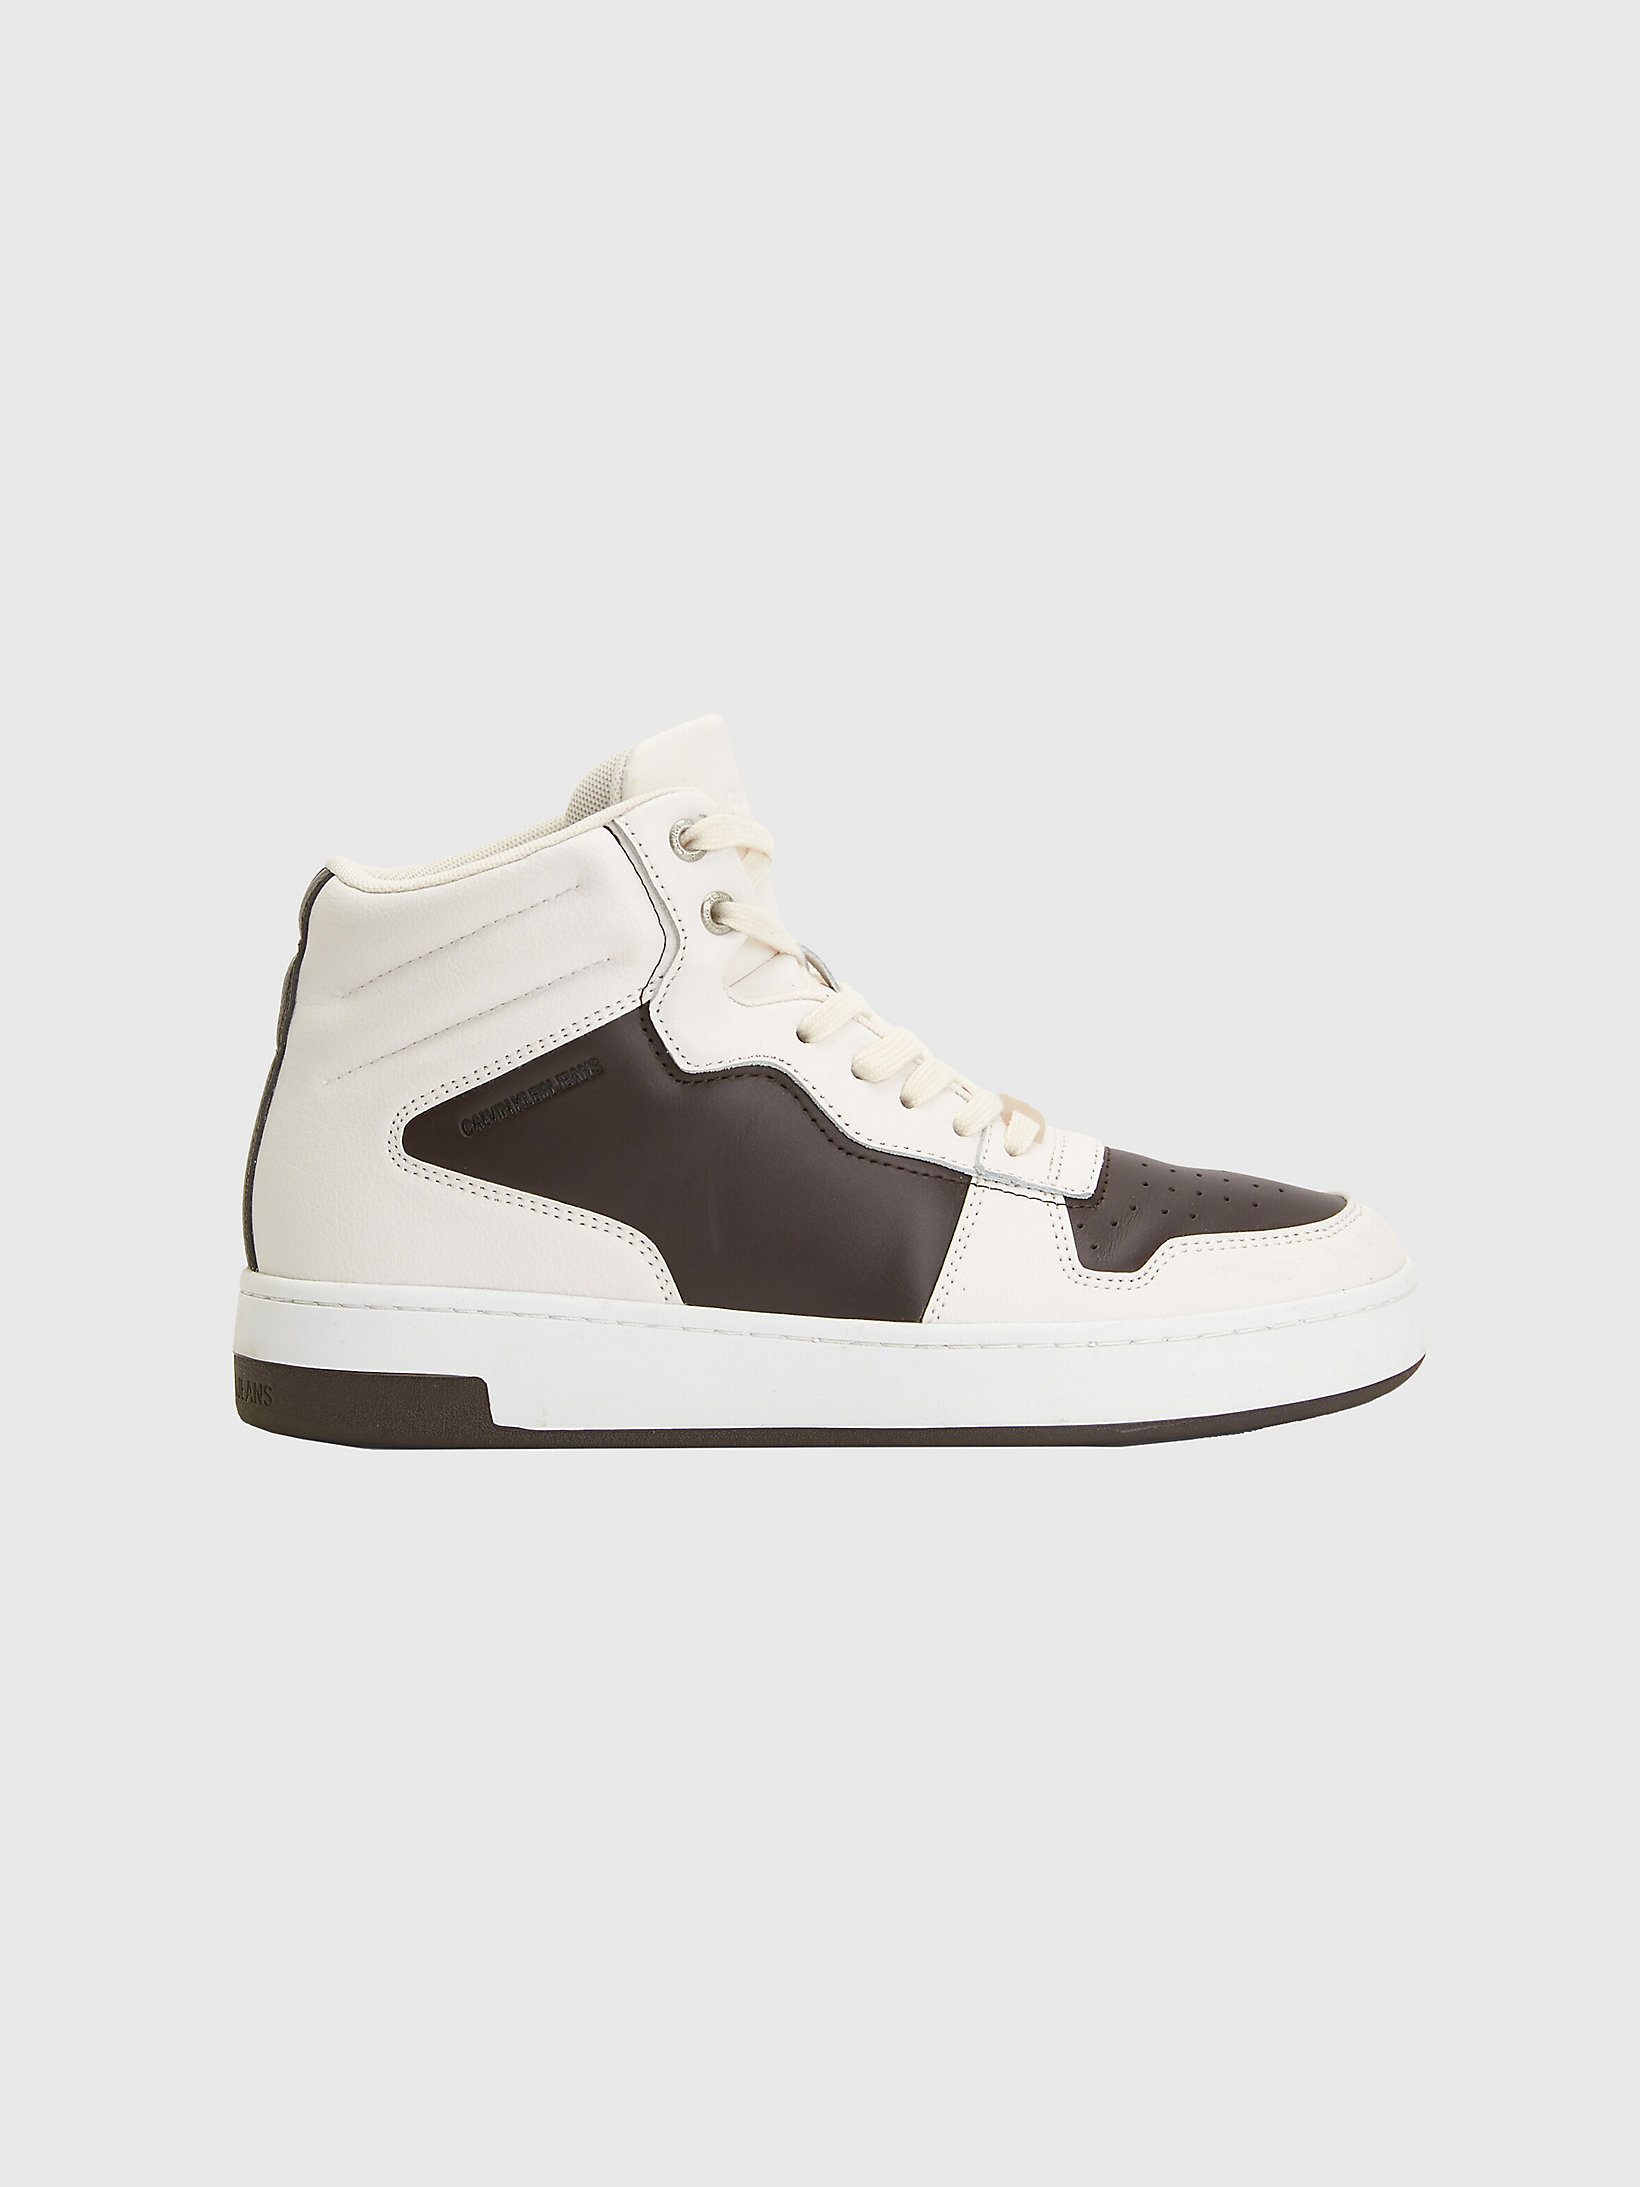 Natural Off White/ Truffle Brown High-Top Trainers undefined women Calvin Klein